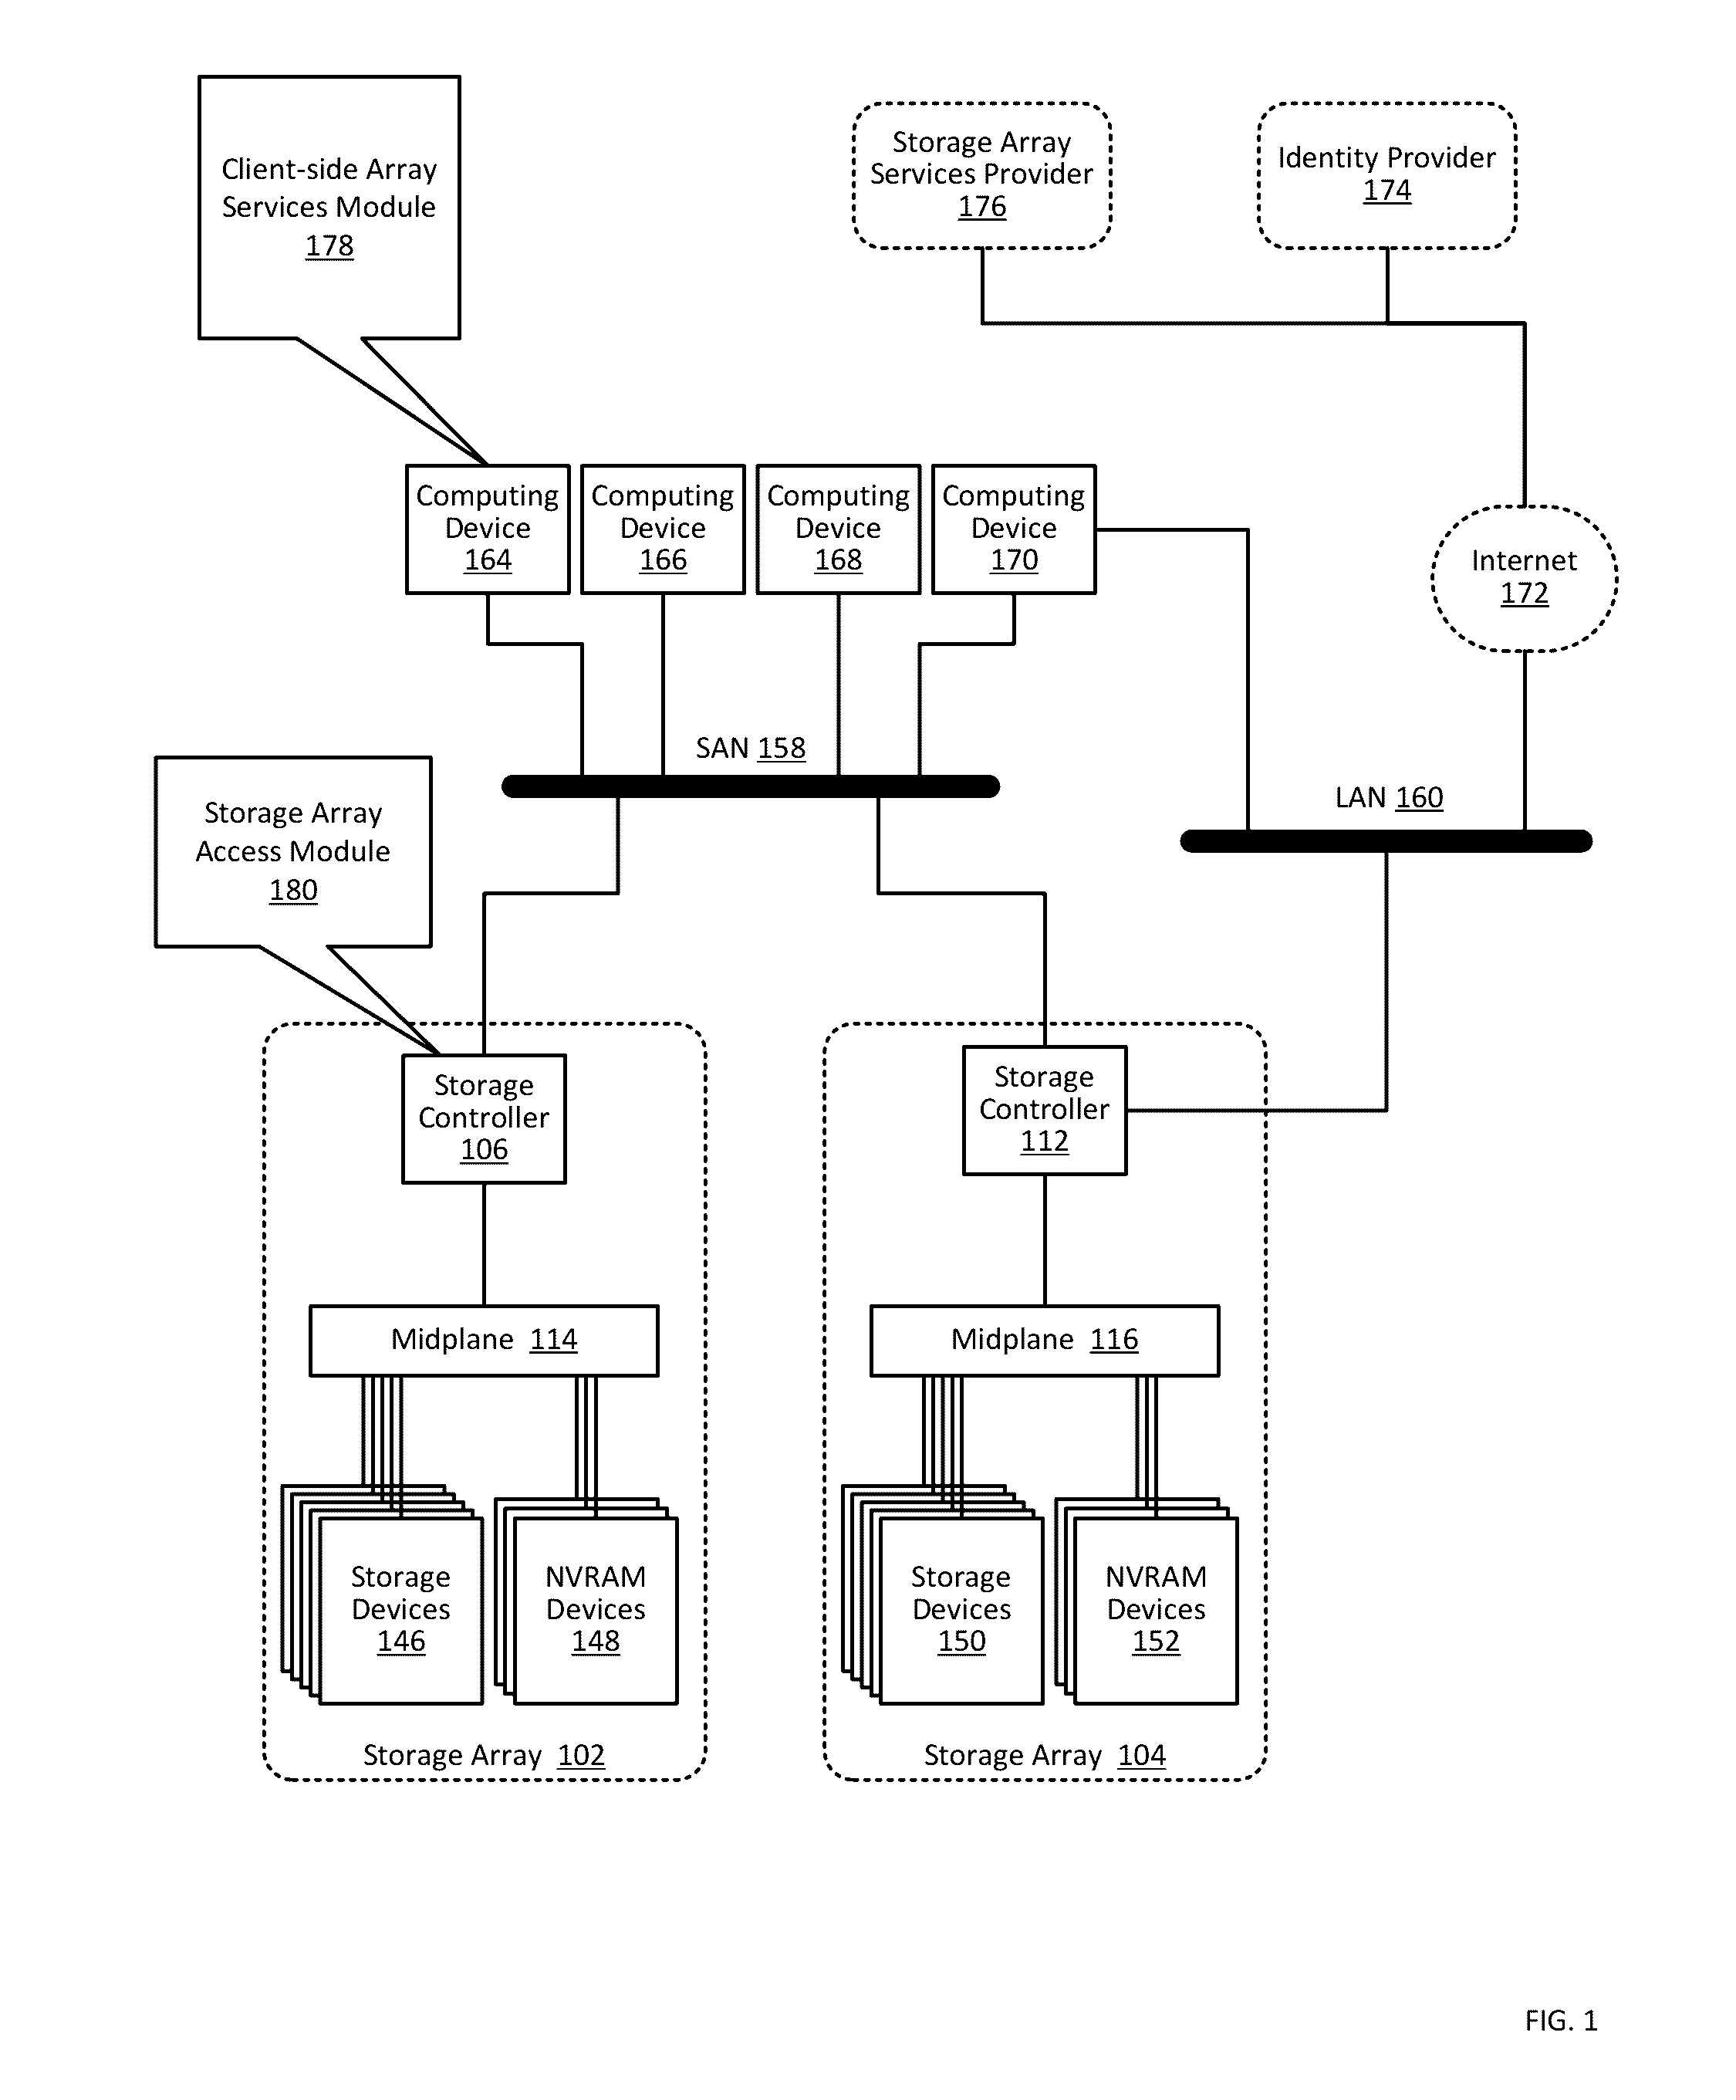 Managing a storage array using client-side services